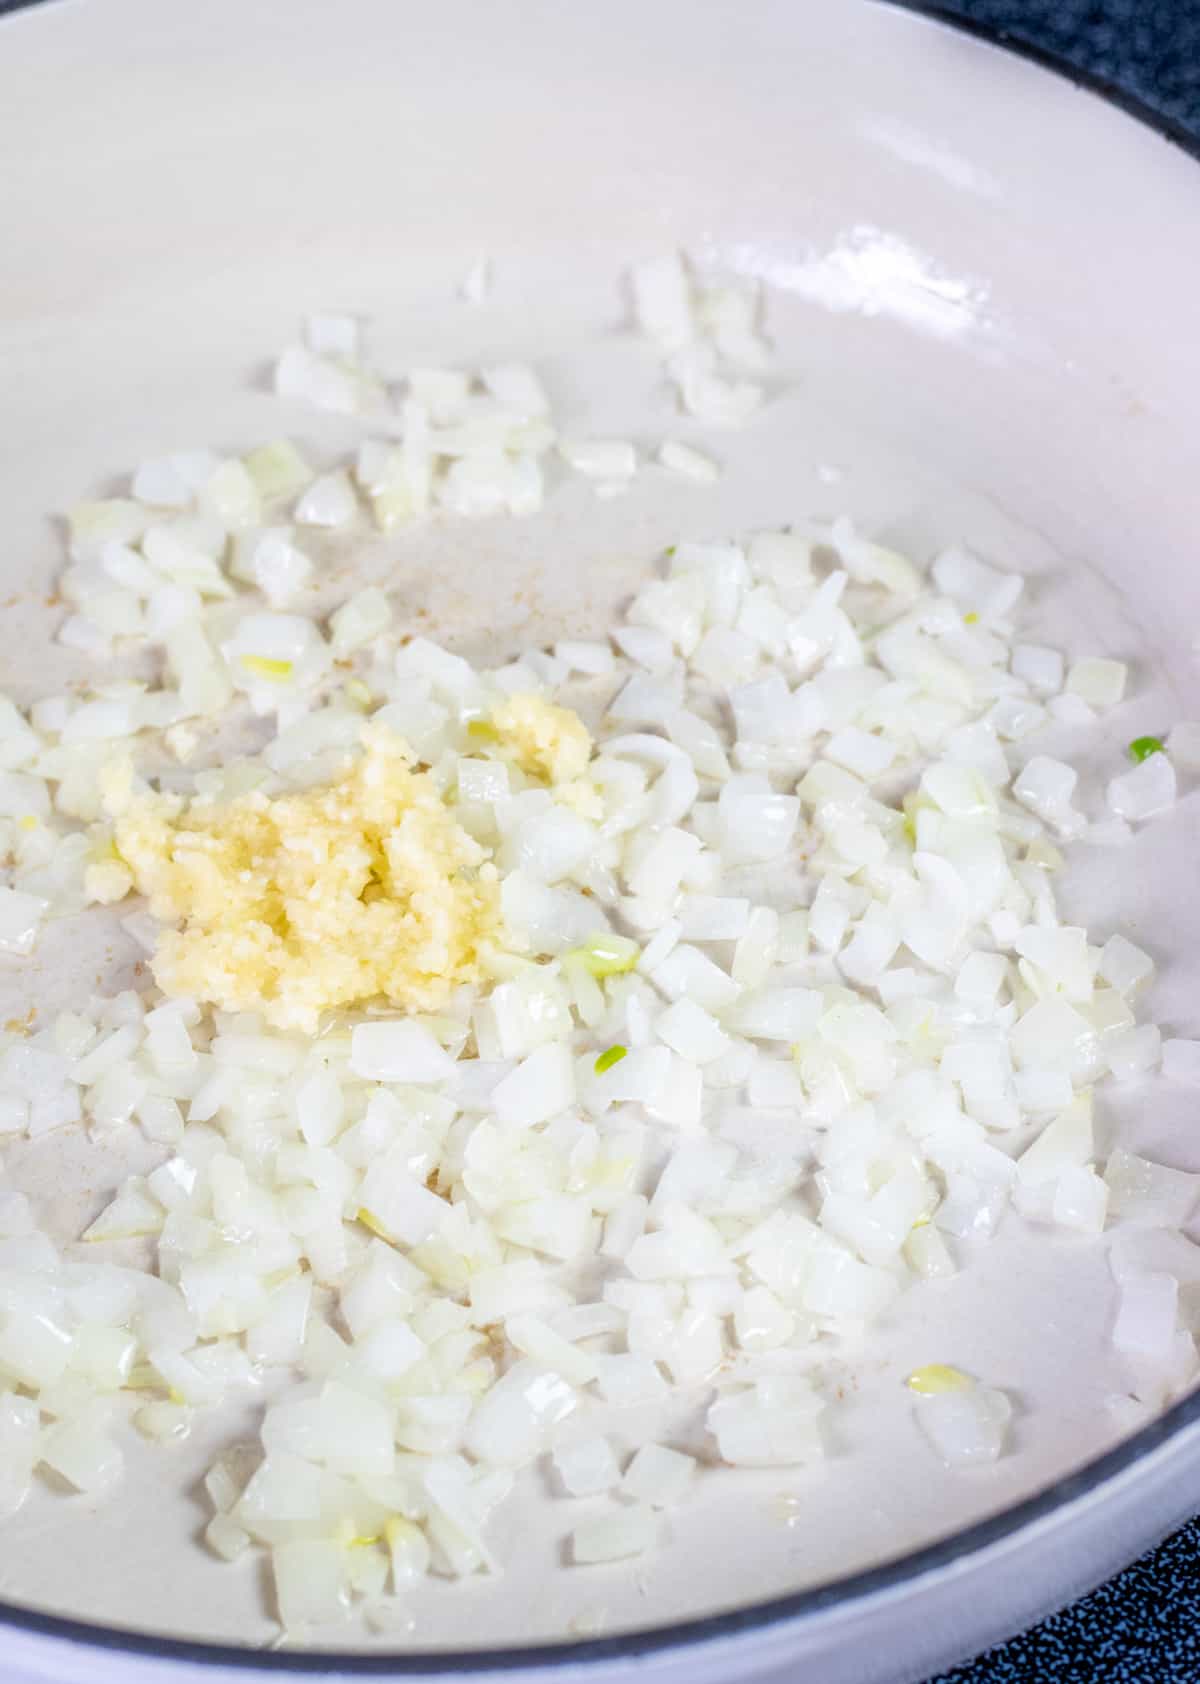 Diced onion and garlic sautéing in a large casserole dish.